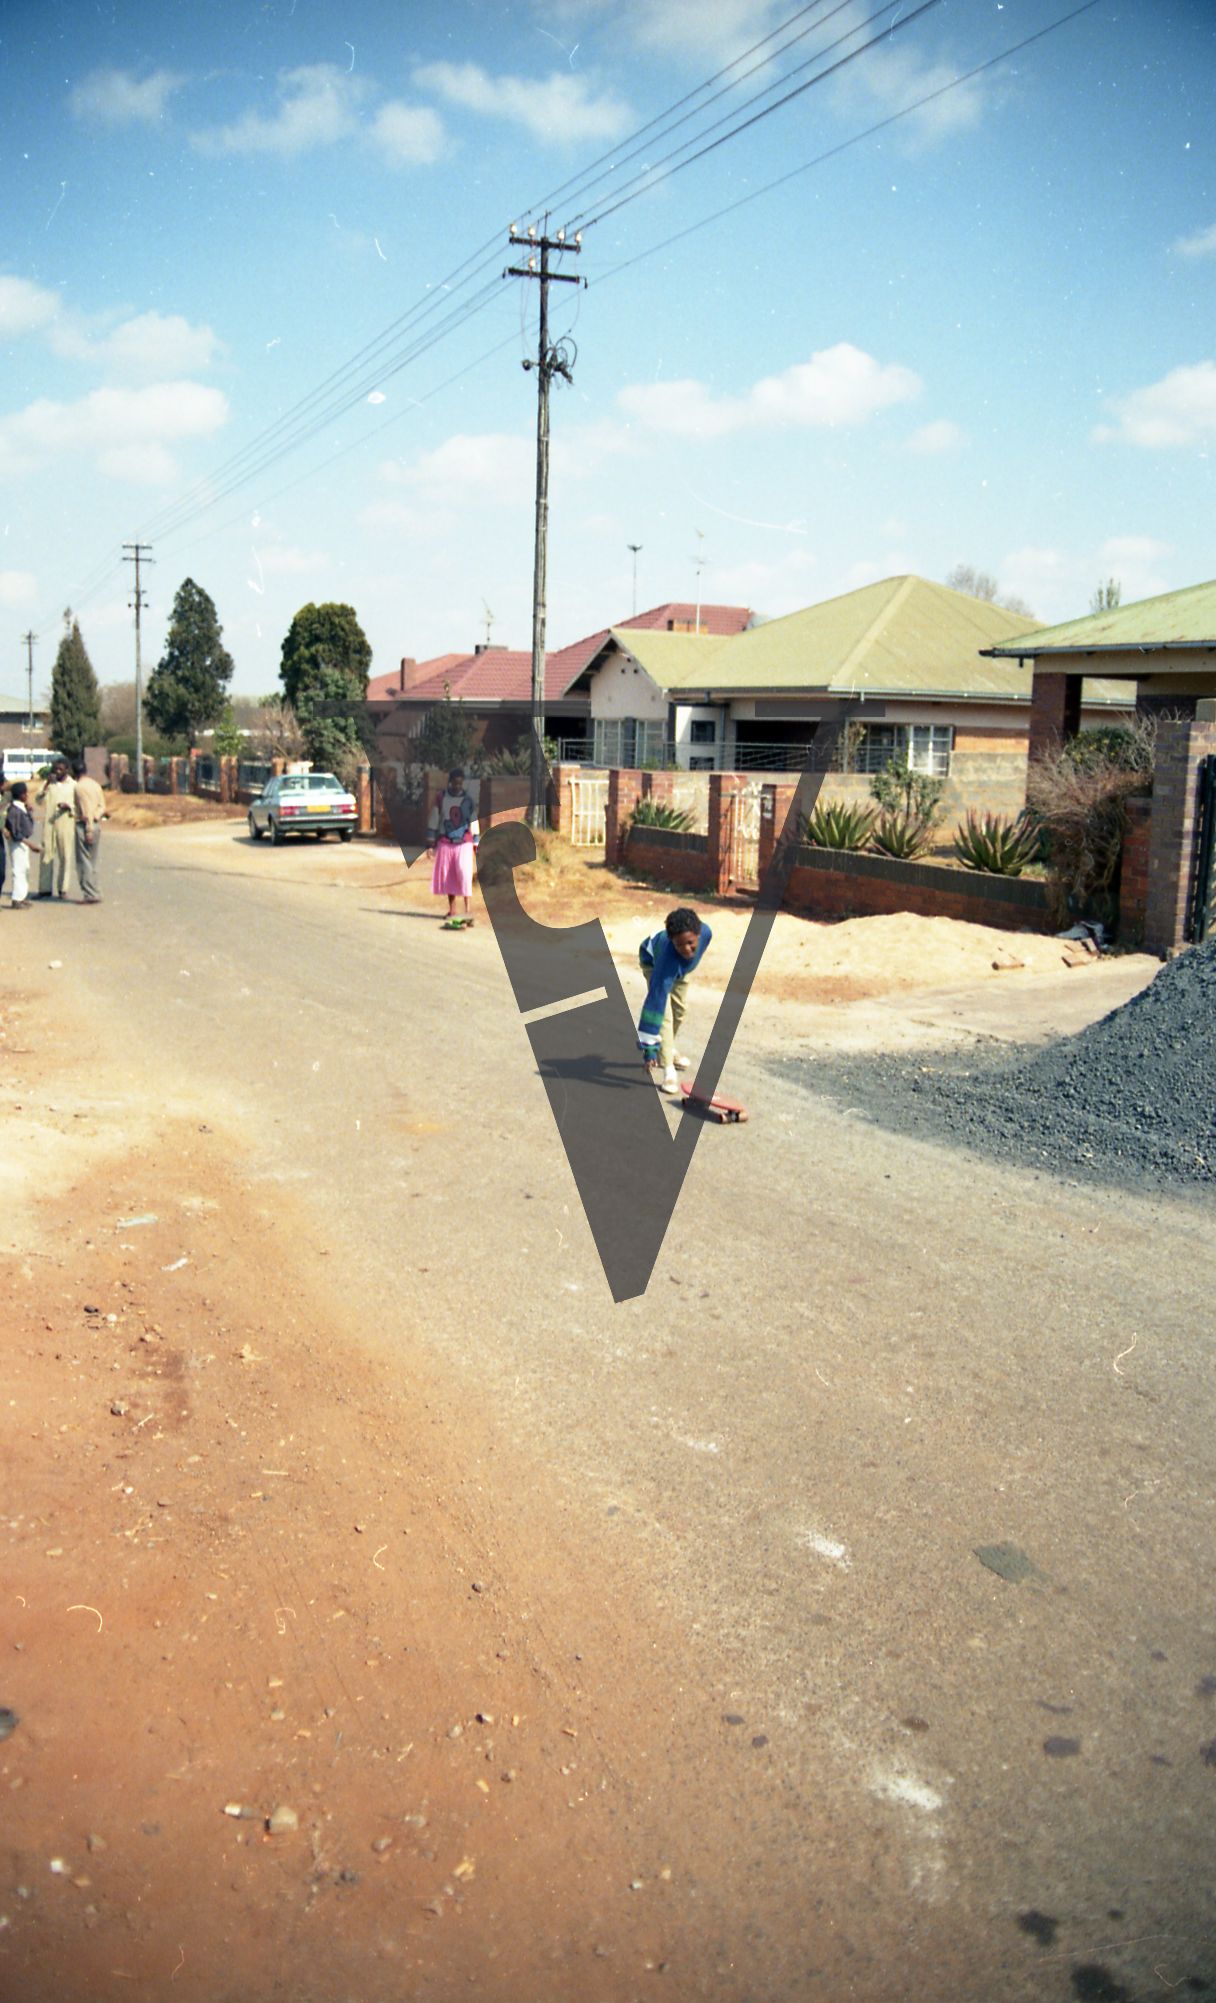 South Africa, township, street scene, people.